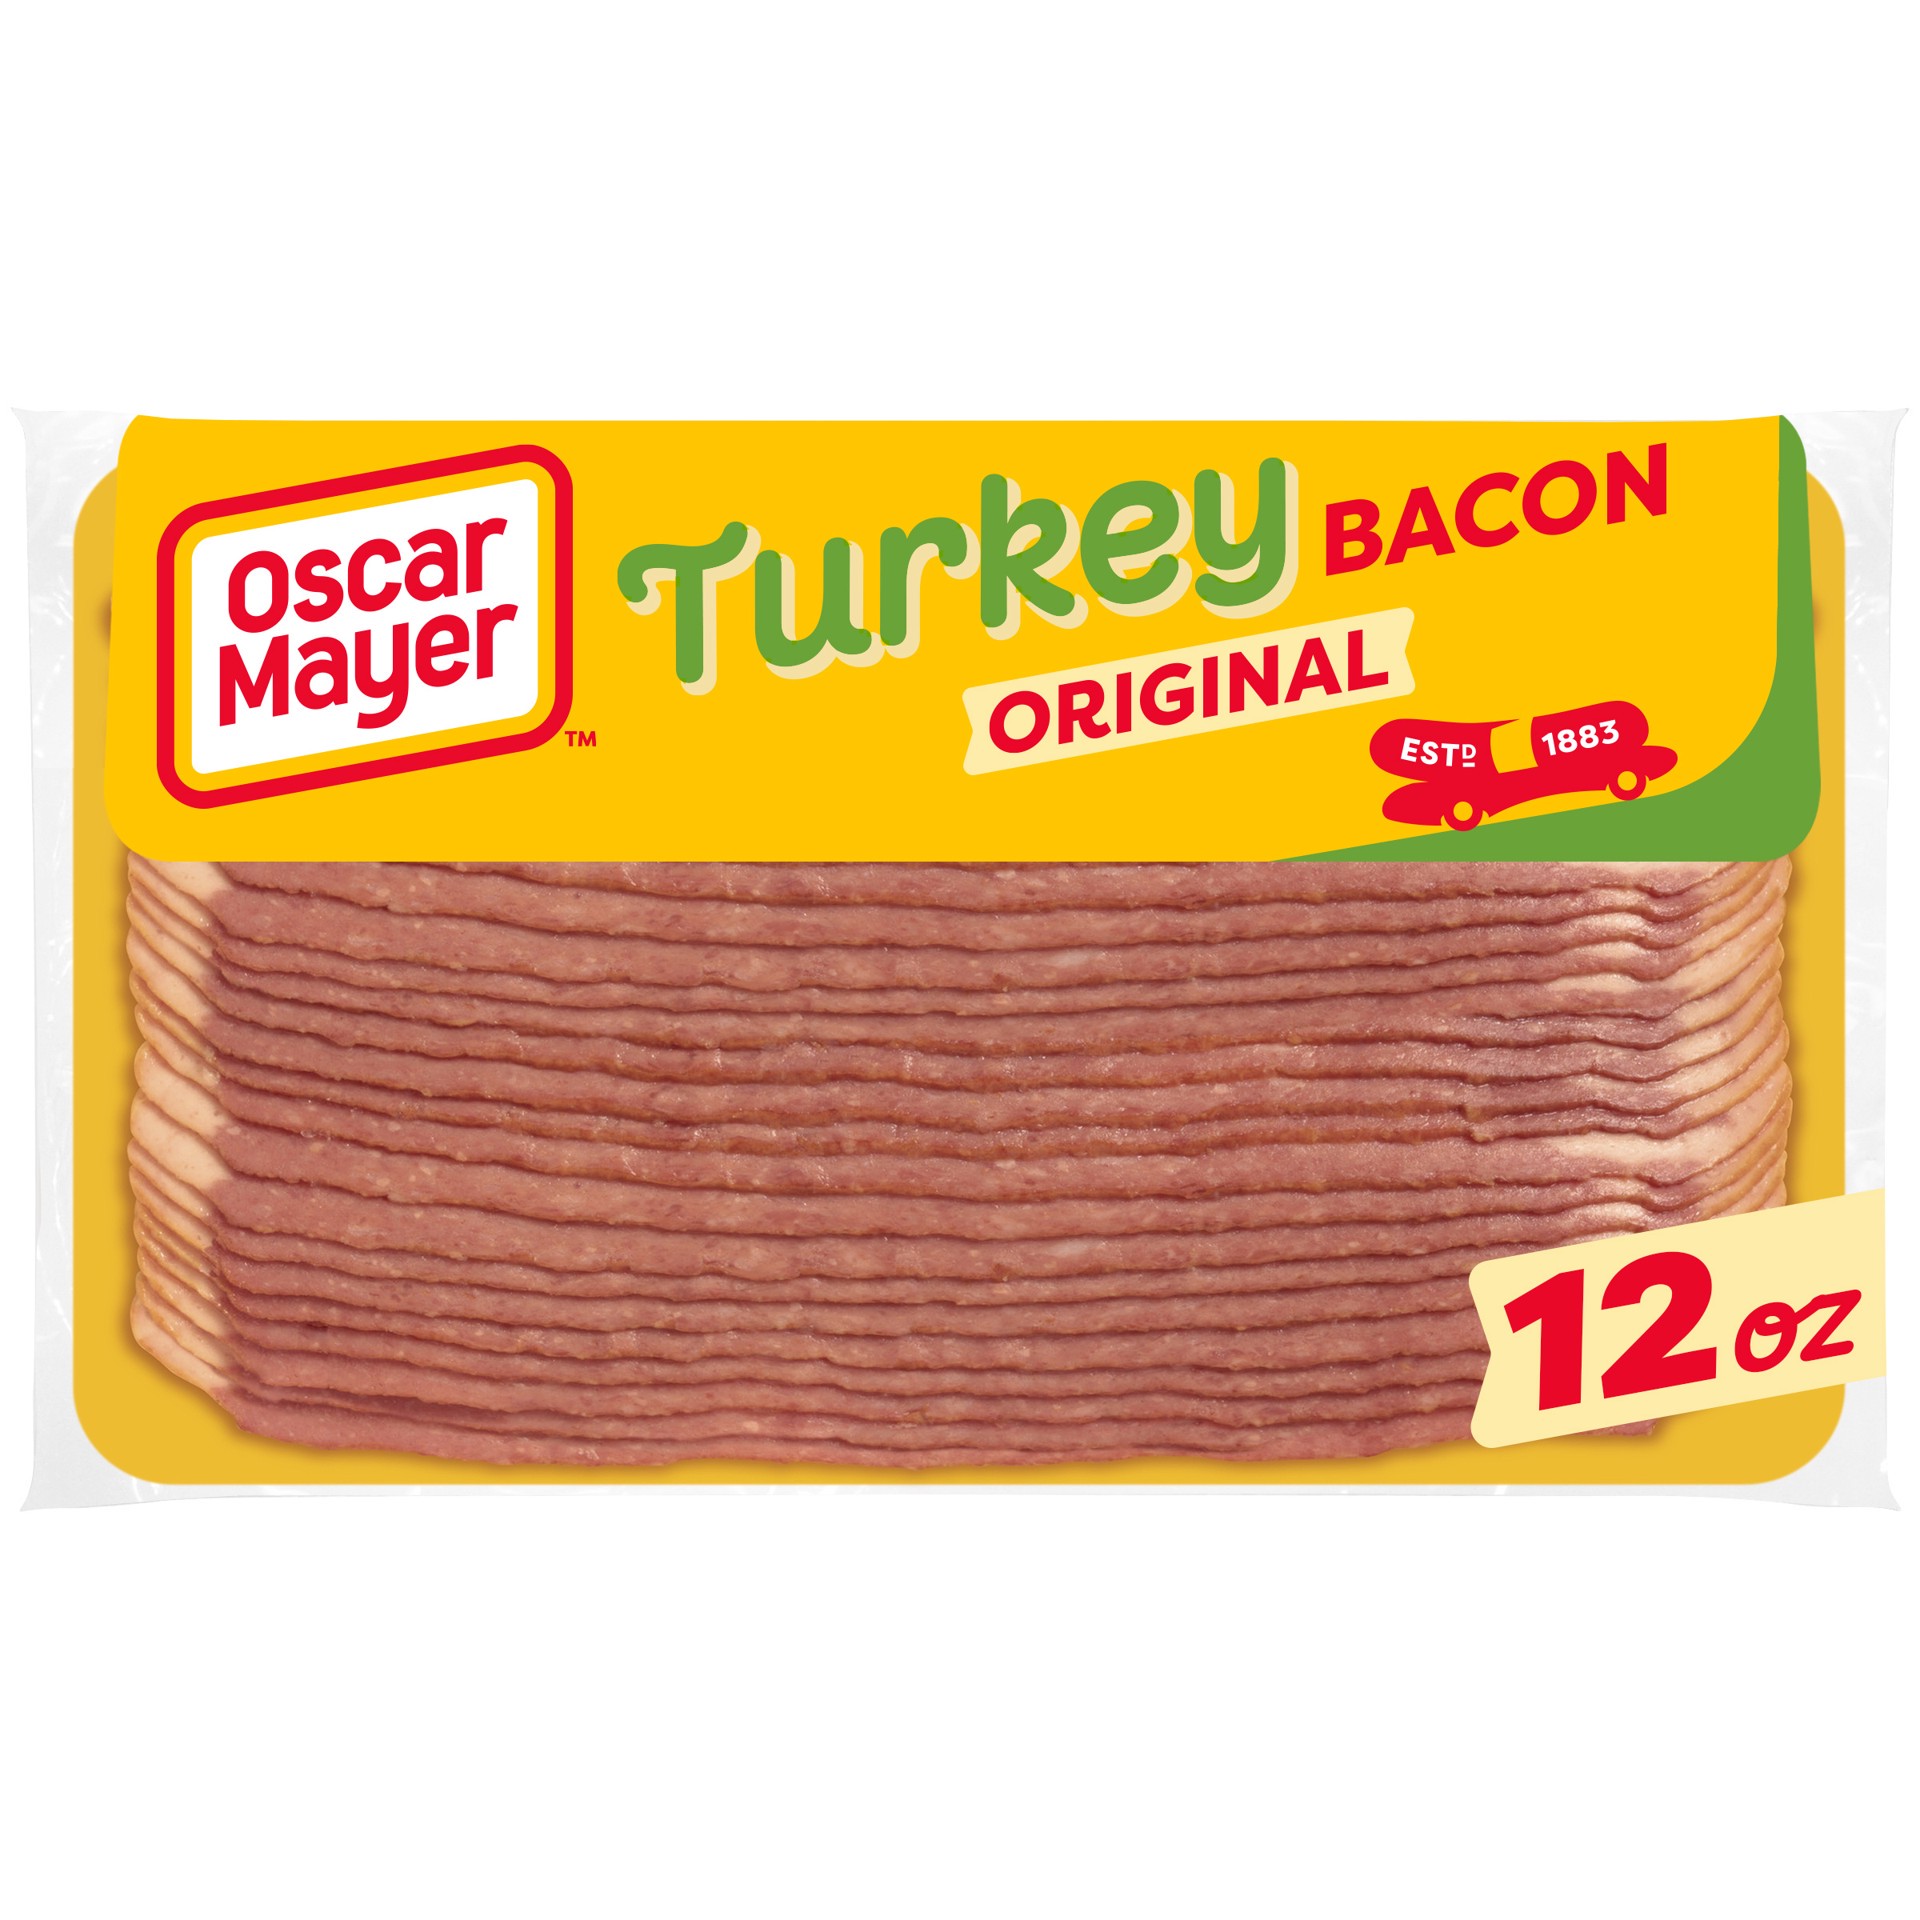 slide 1 of 9, Oscar Mayer Gluten Free Turkey Bacon with 58% Less Fat & 57% Less Sodium, 12 oz Pack, 21-23 slices, 12 oz